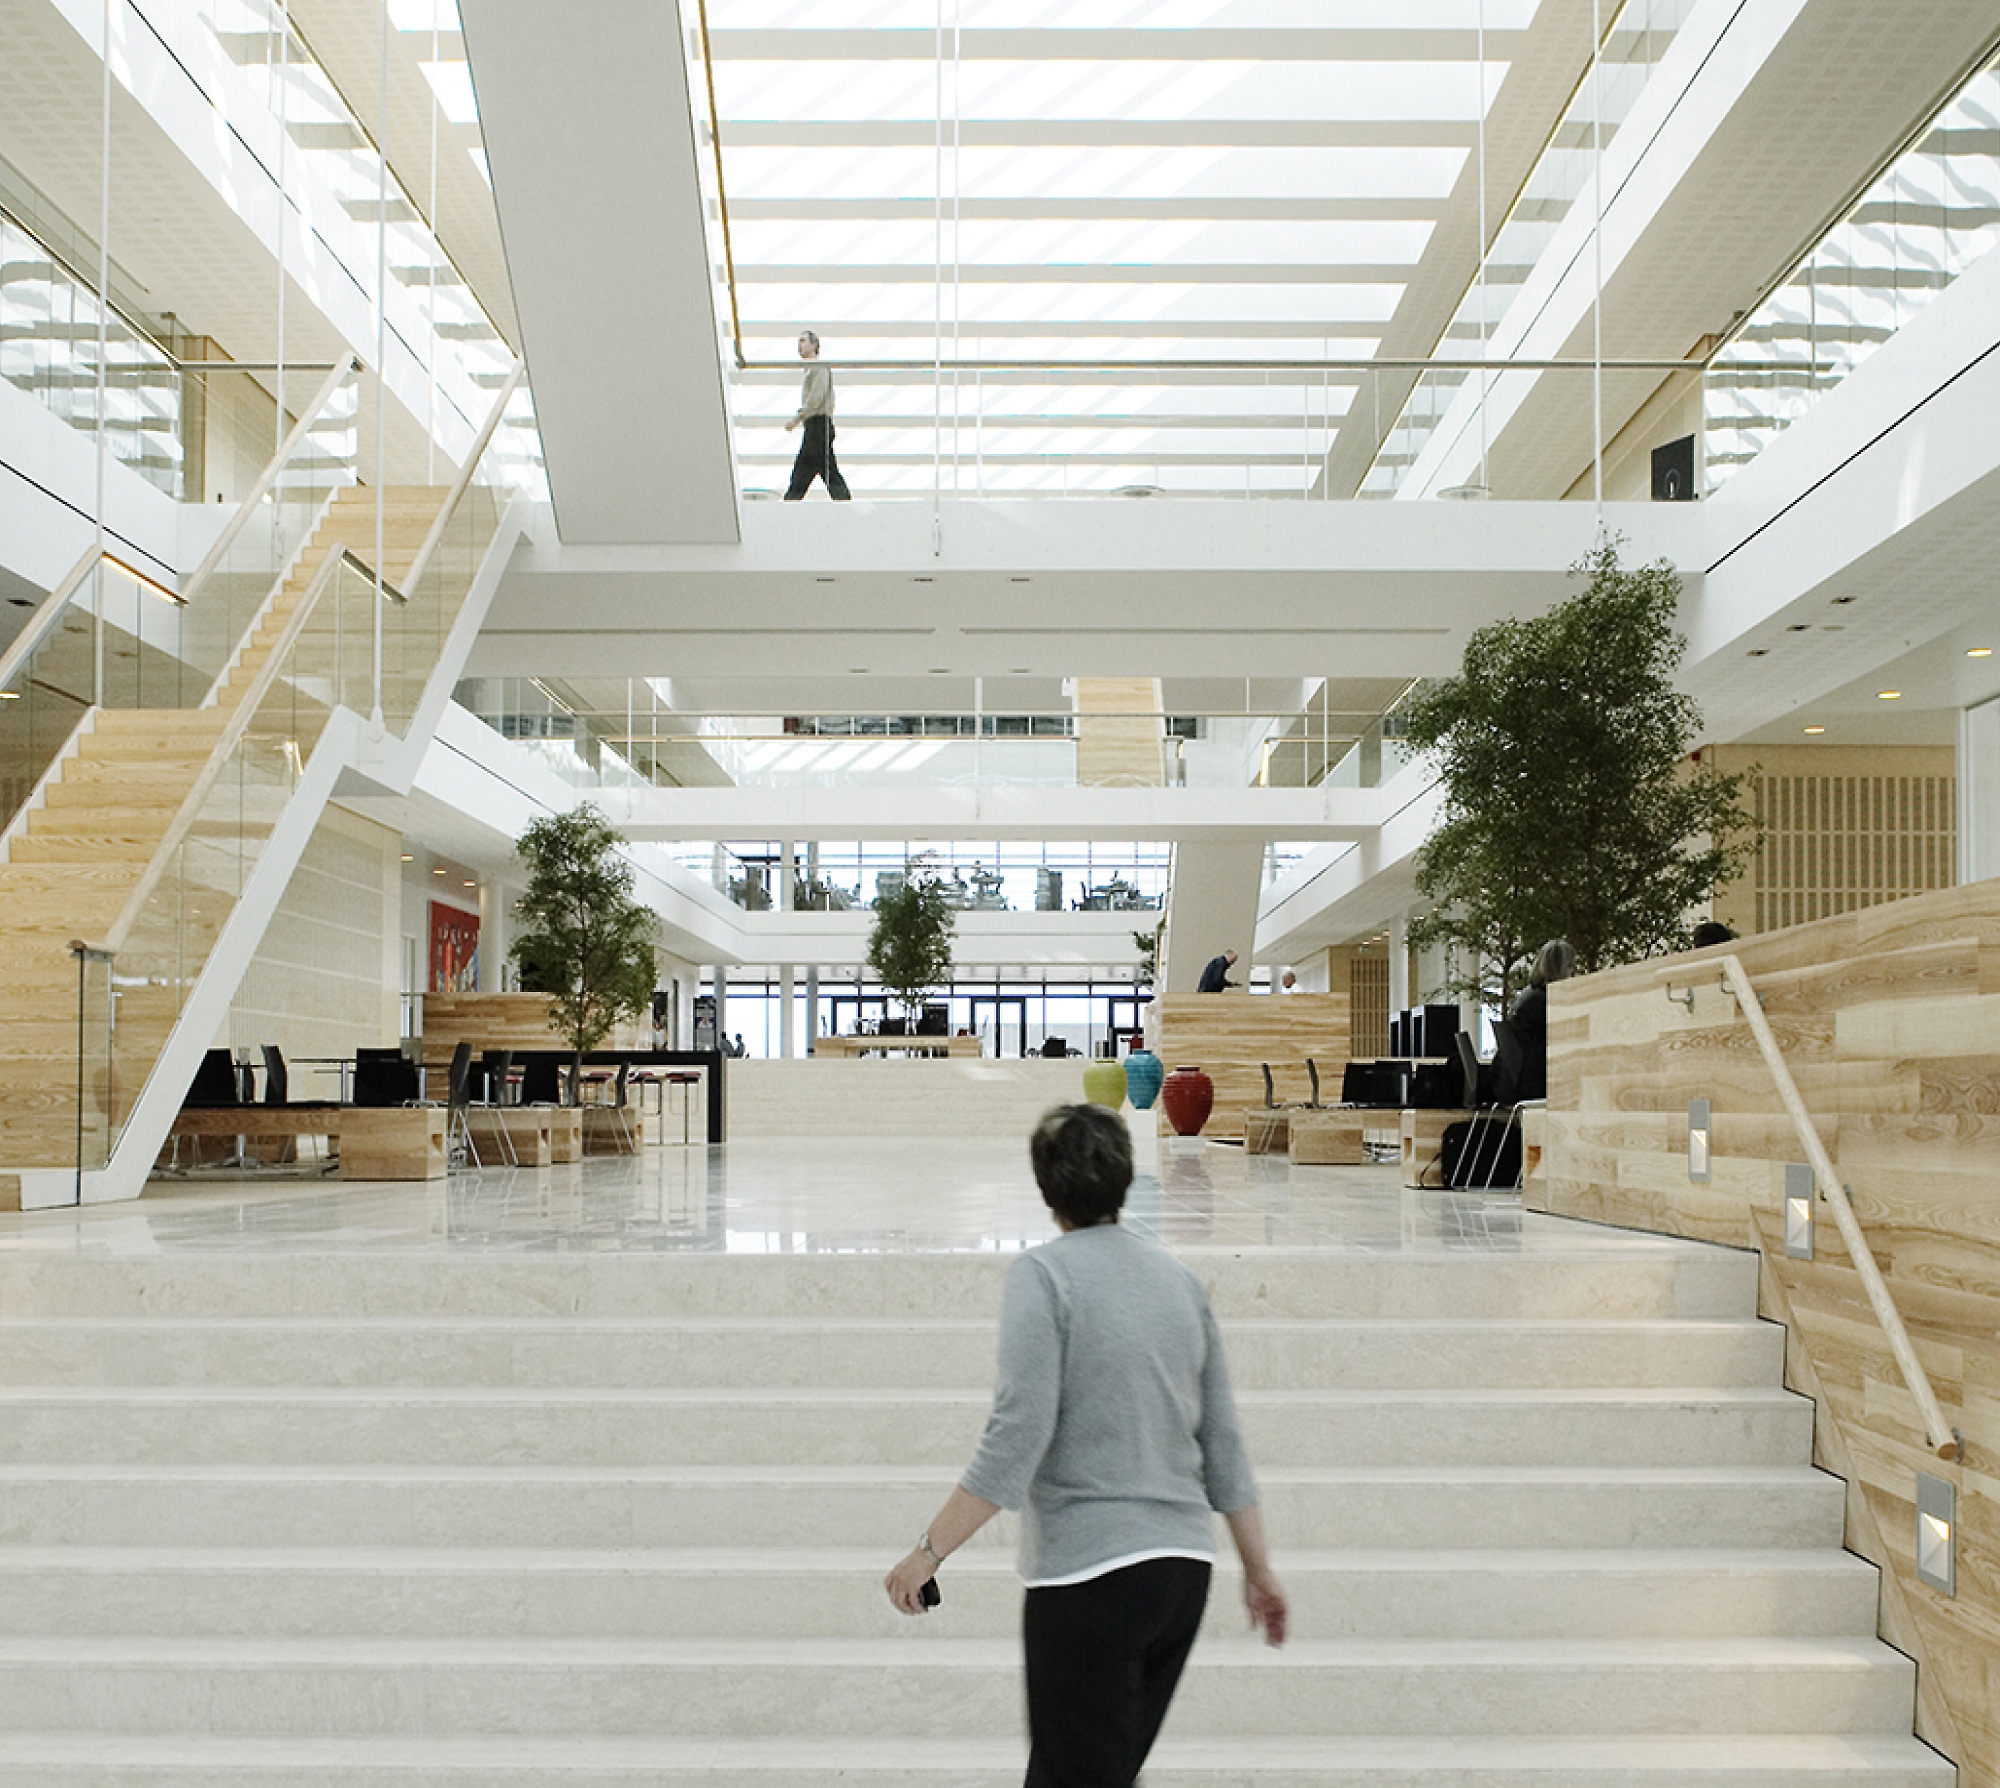 Modern office lobby with large white staircases, wooden accents, and people walking around. bright and airy atmosphere.